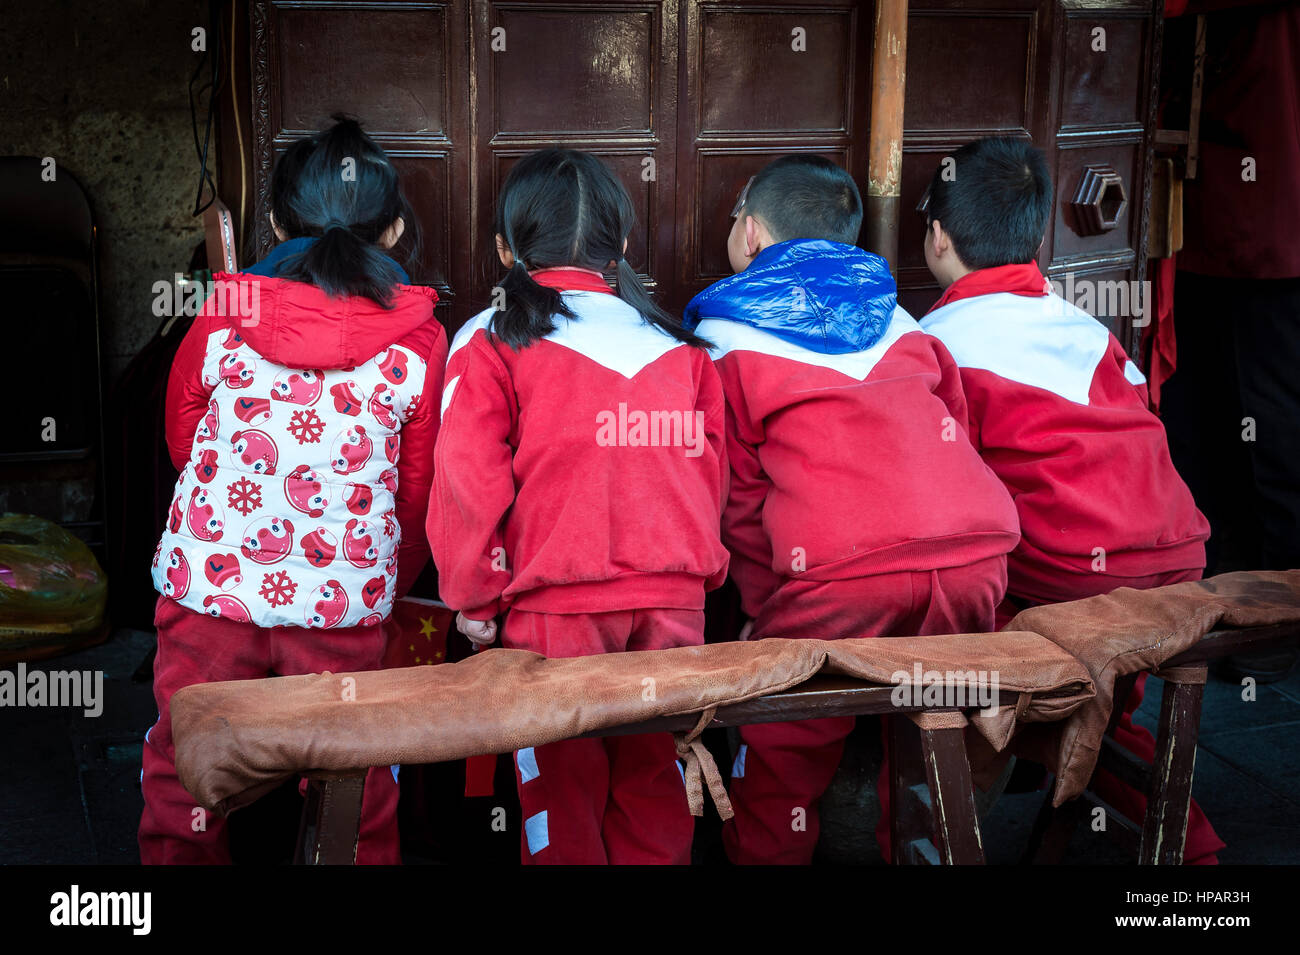 HANGZHOU, CHINA - FEB 2015 - A group of school children watch an old movie through a wooden box on Hefang Old Street in Hangzhou, China Stock Photo